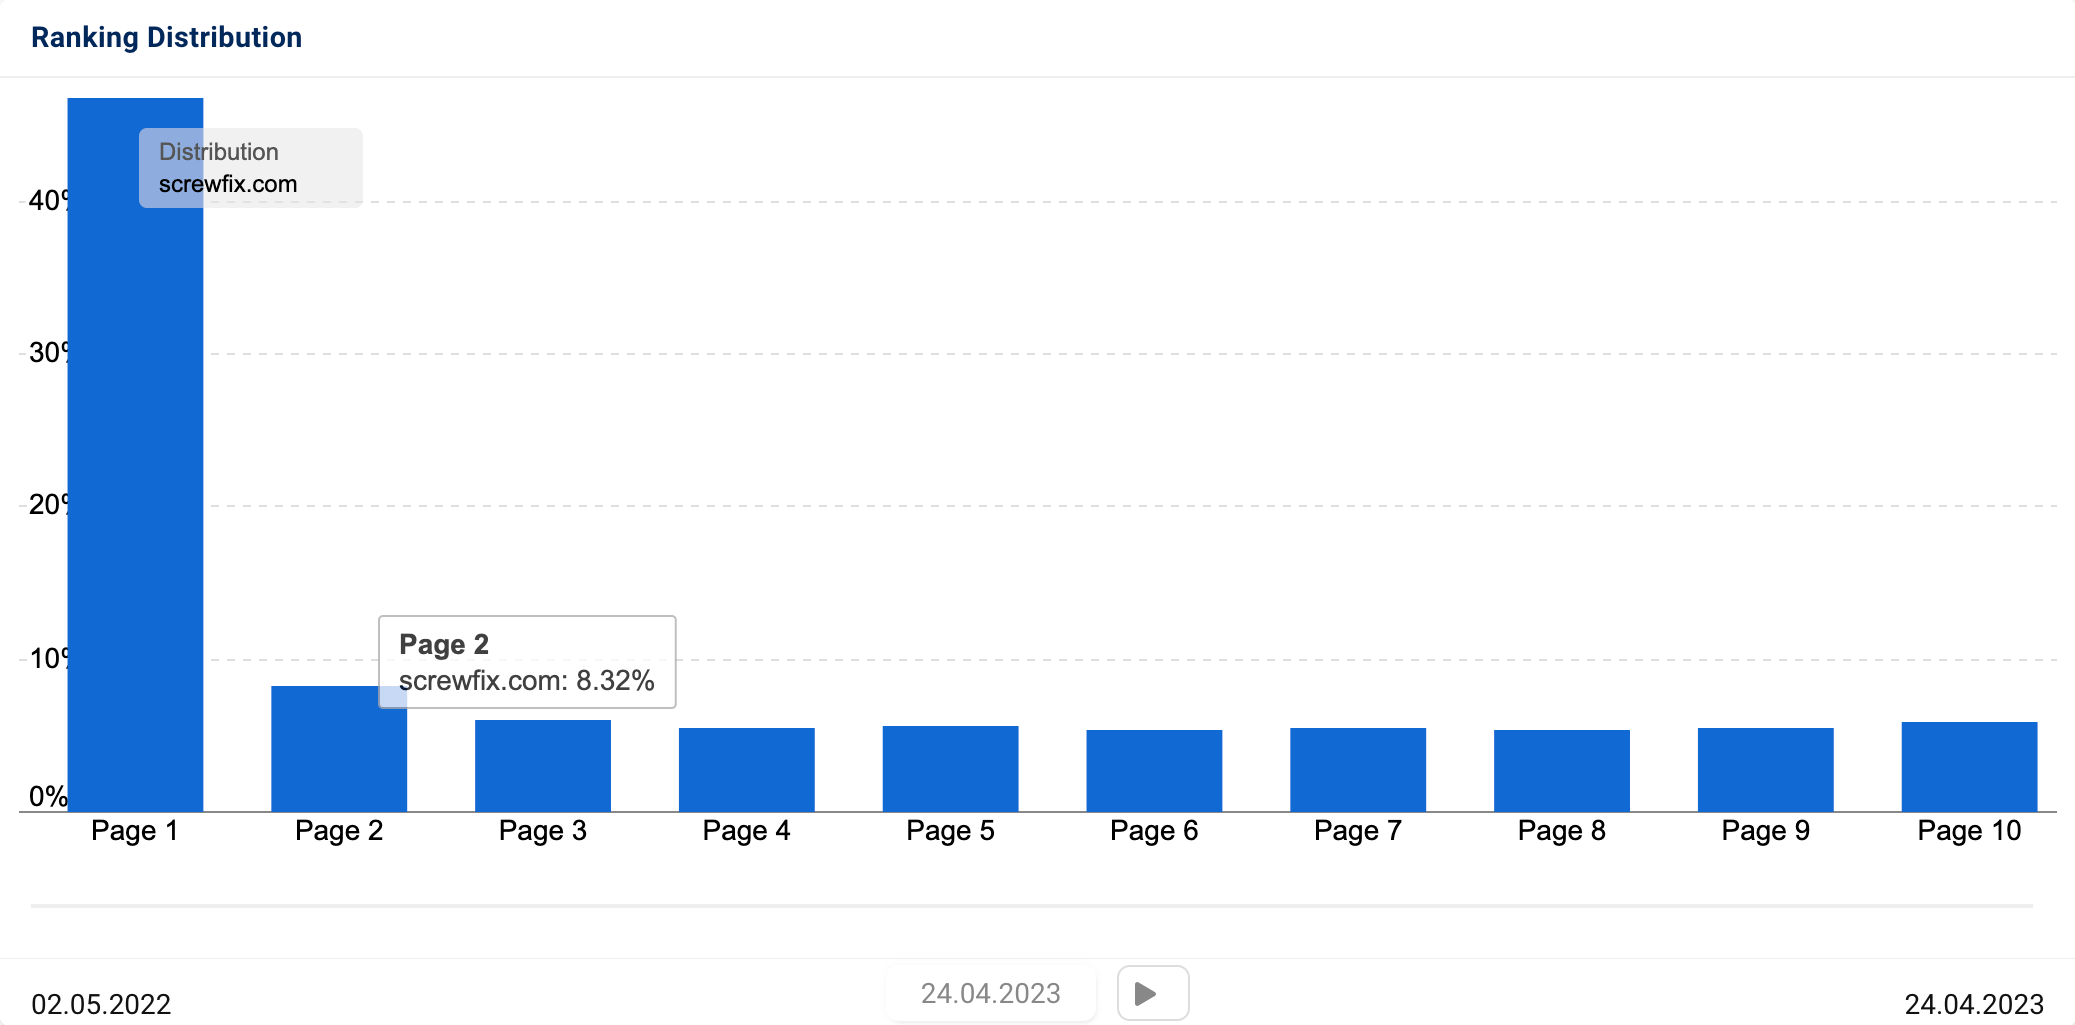 The ranking distribution of the domain screwfix.com. We can see that 8.32% of the domain's total top 100 rankings are on the second Google results page.